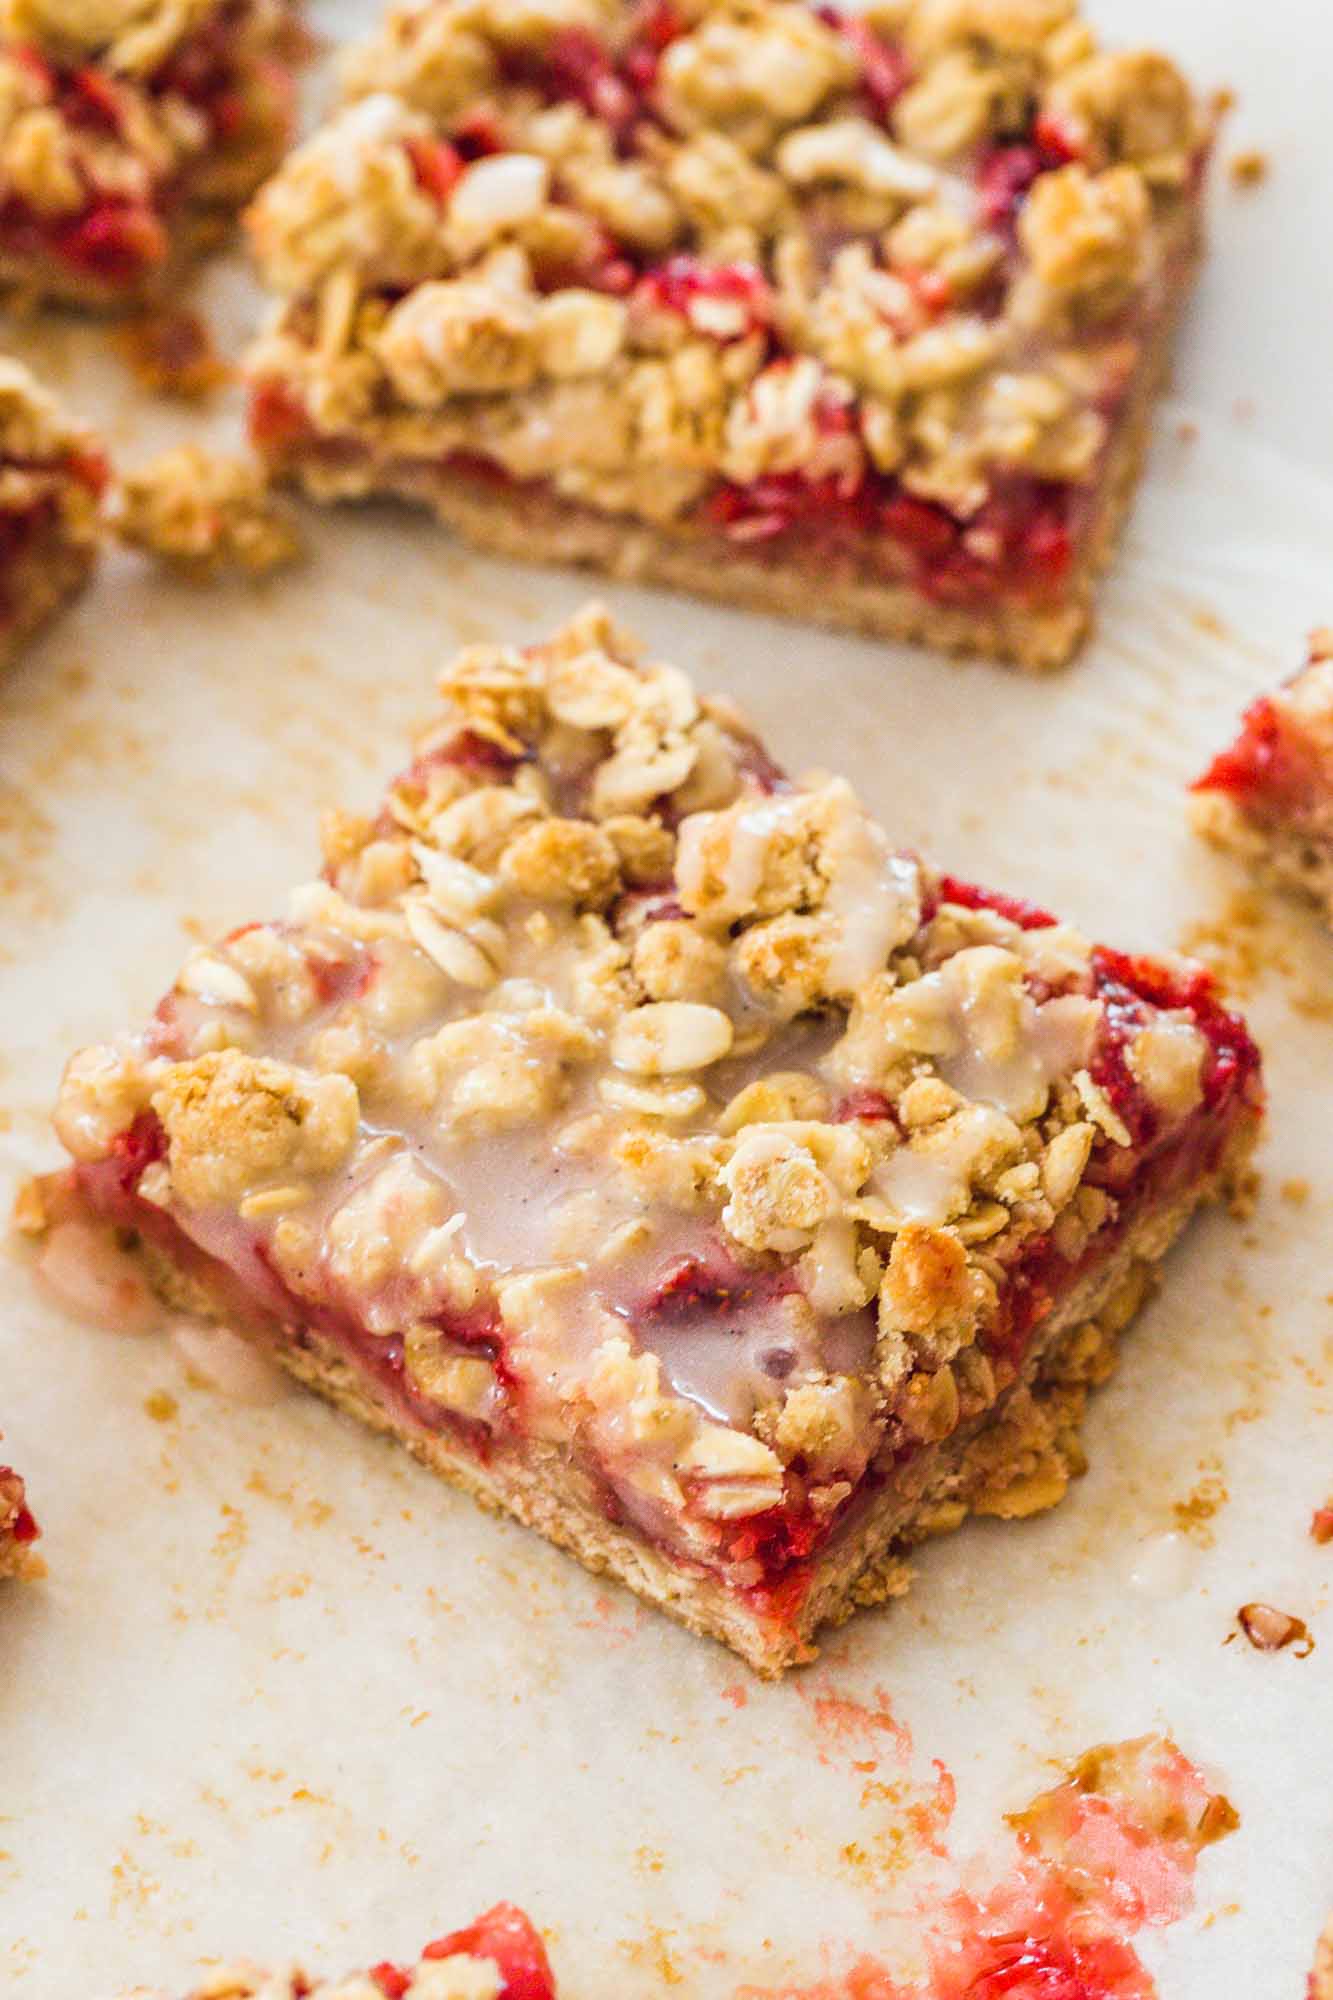 Strawberry crumb bars with a simple glaze